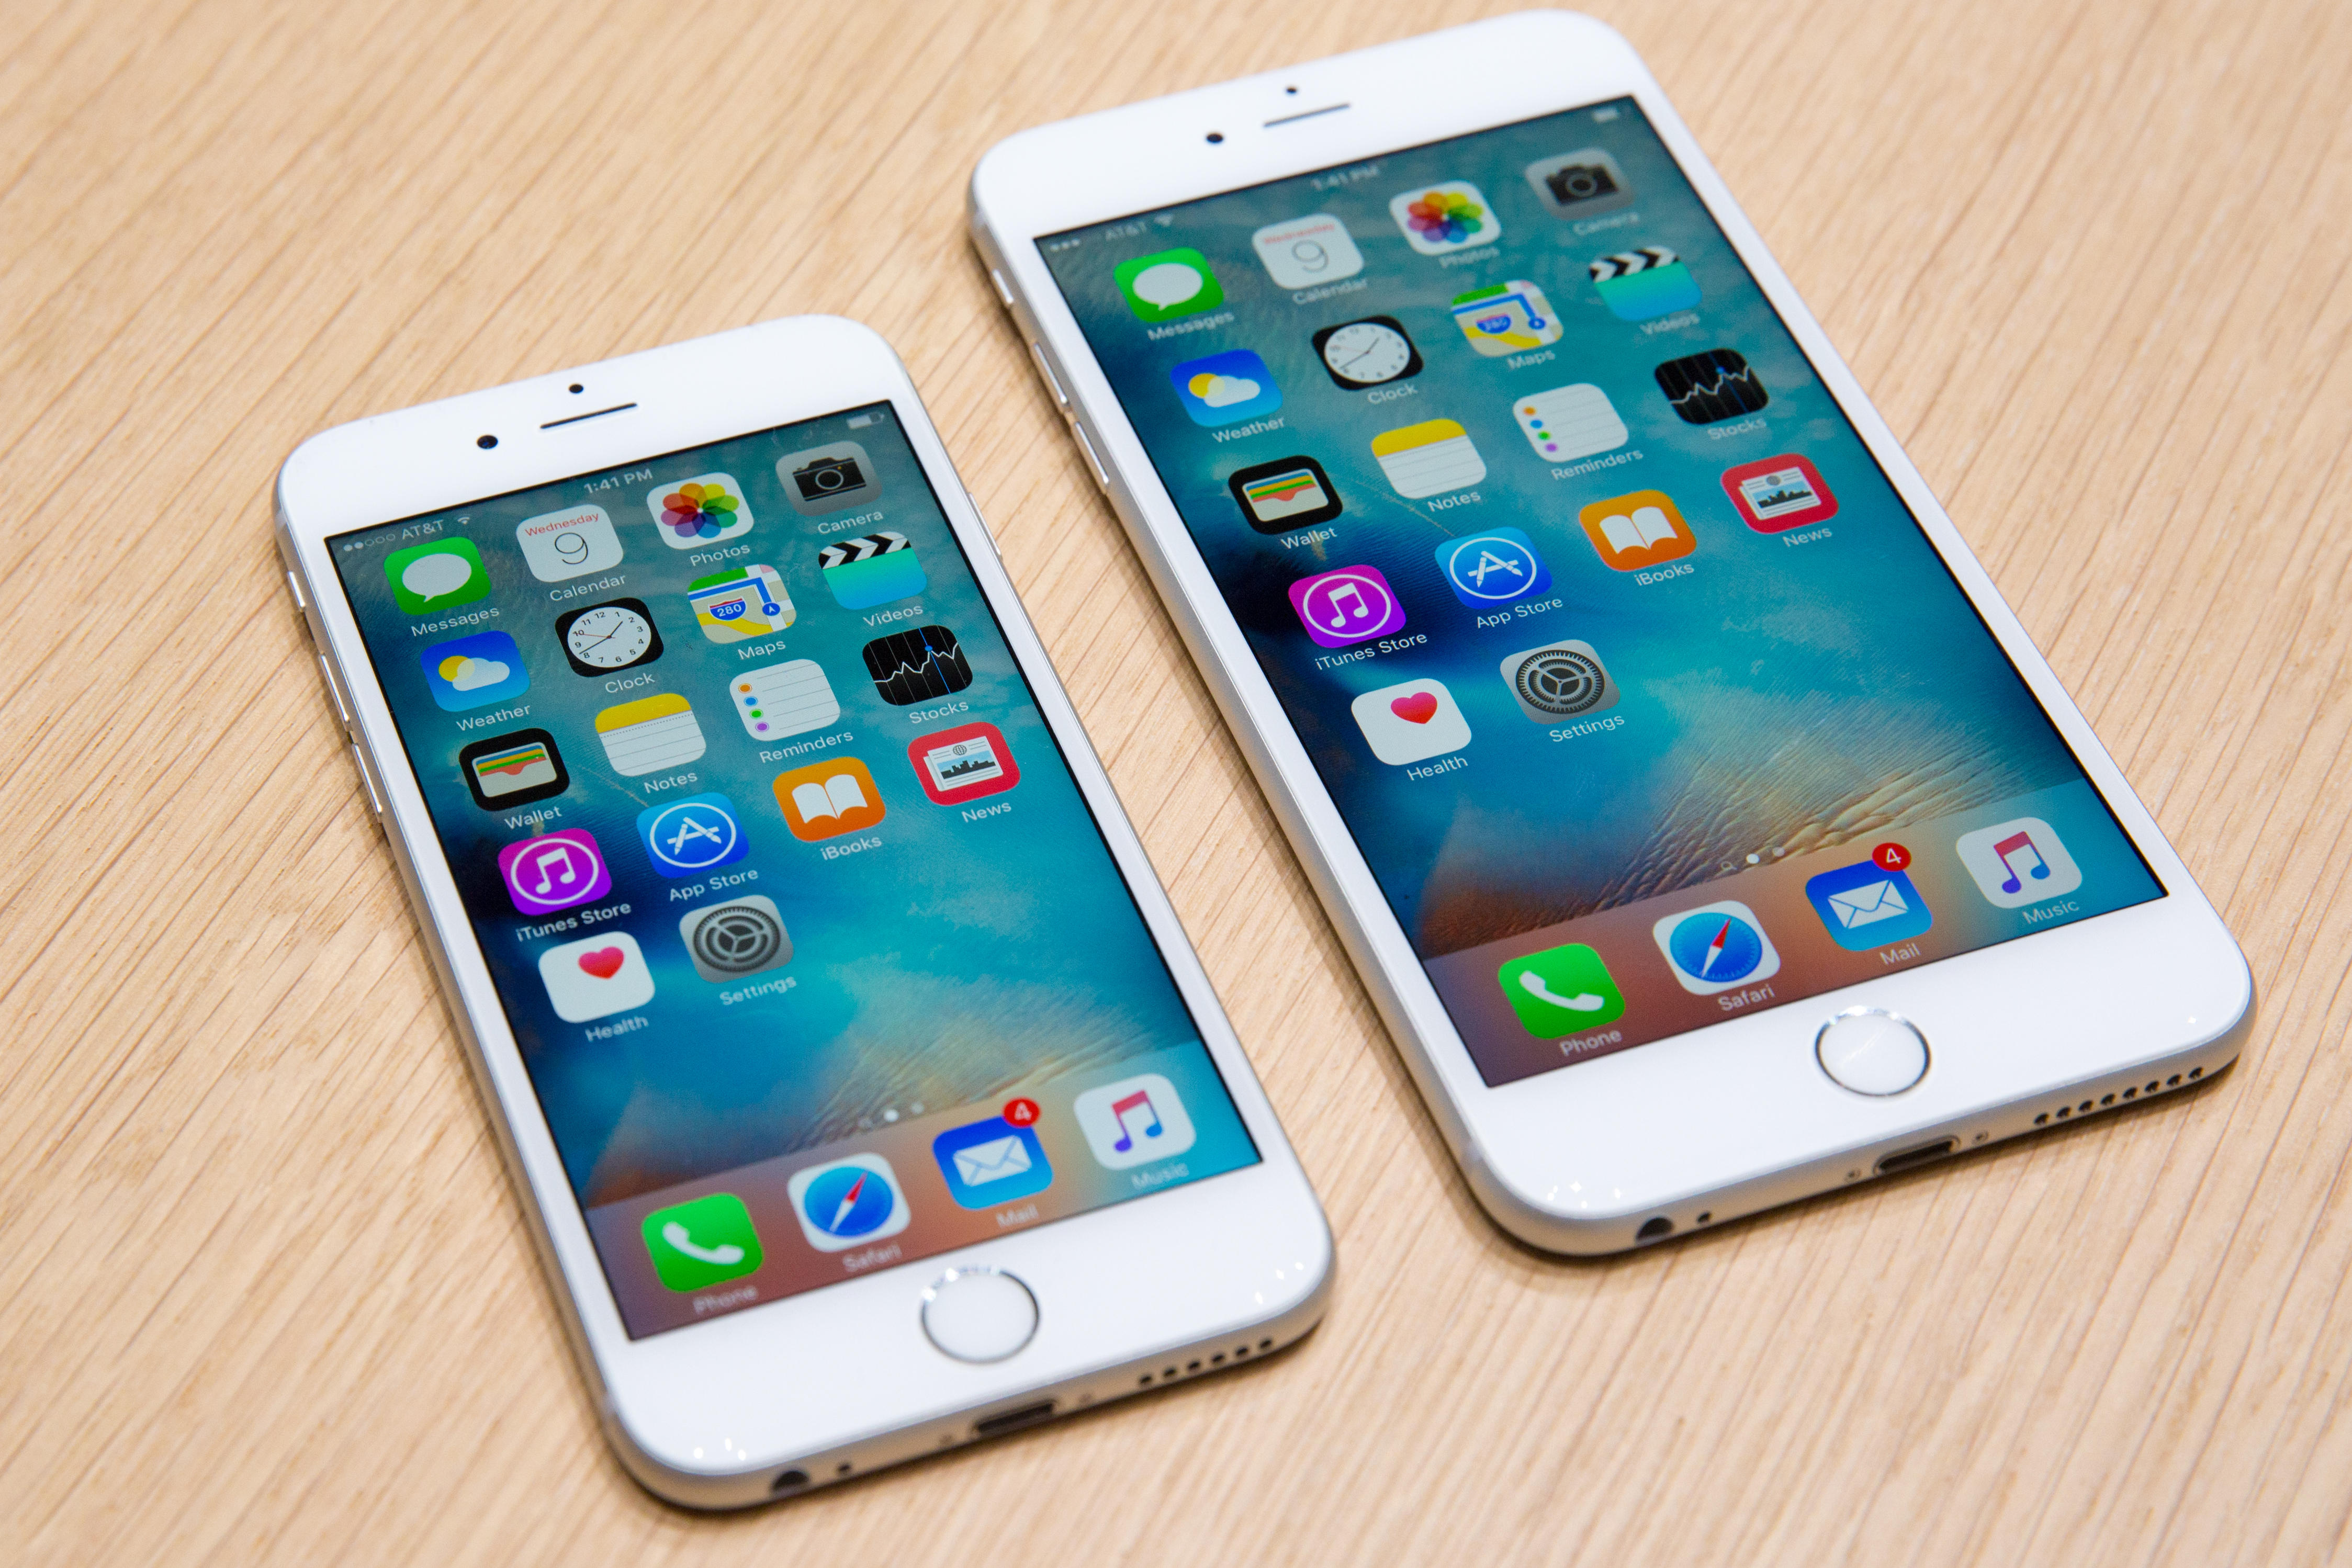 The iPhone 6S and iPhone 6S Plus arrive this week.